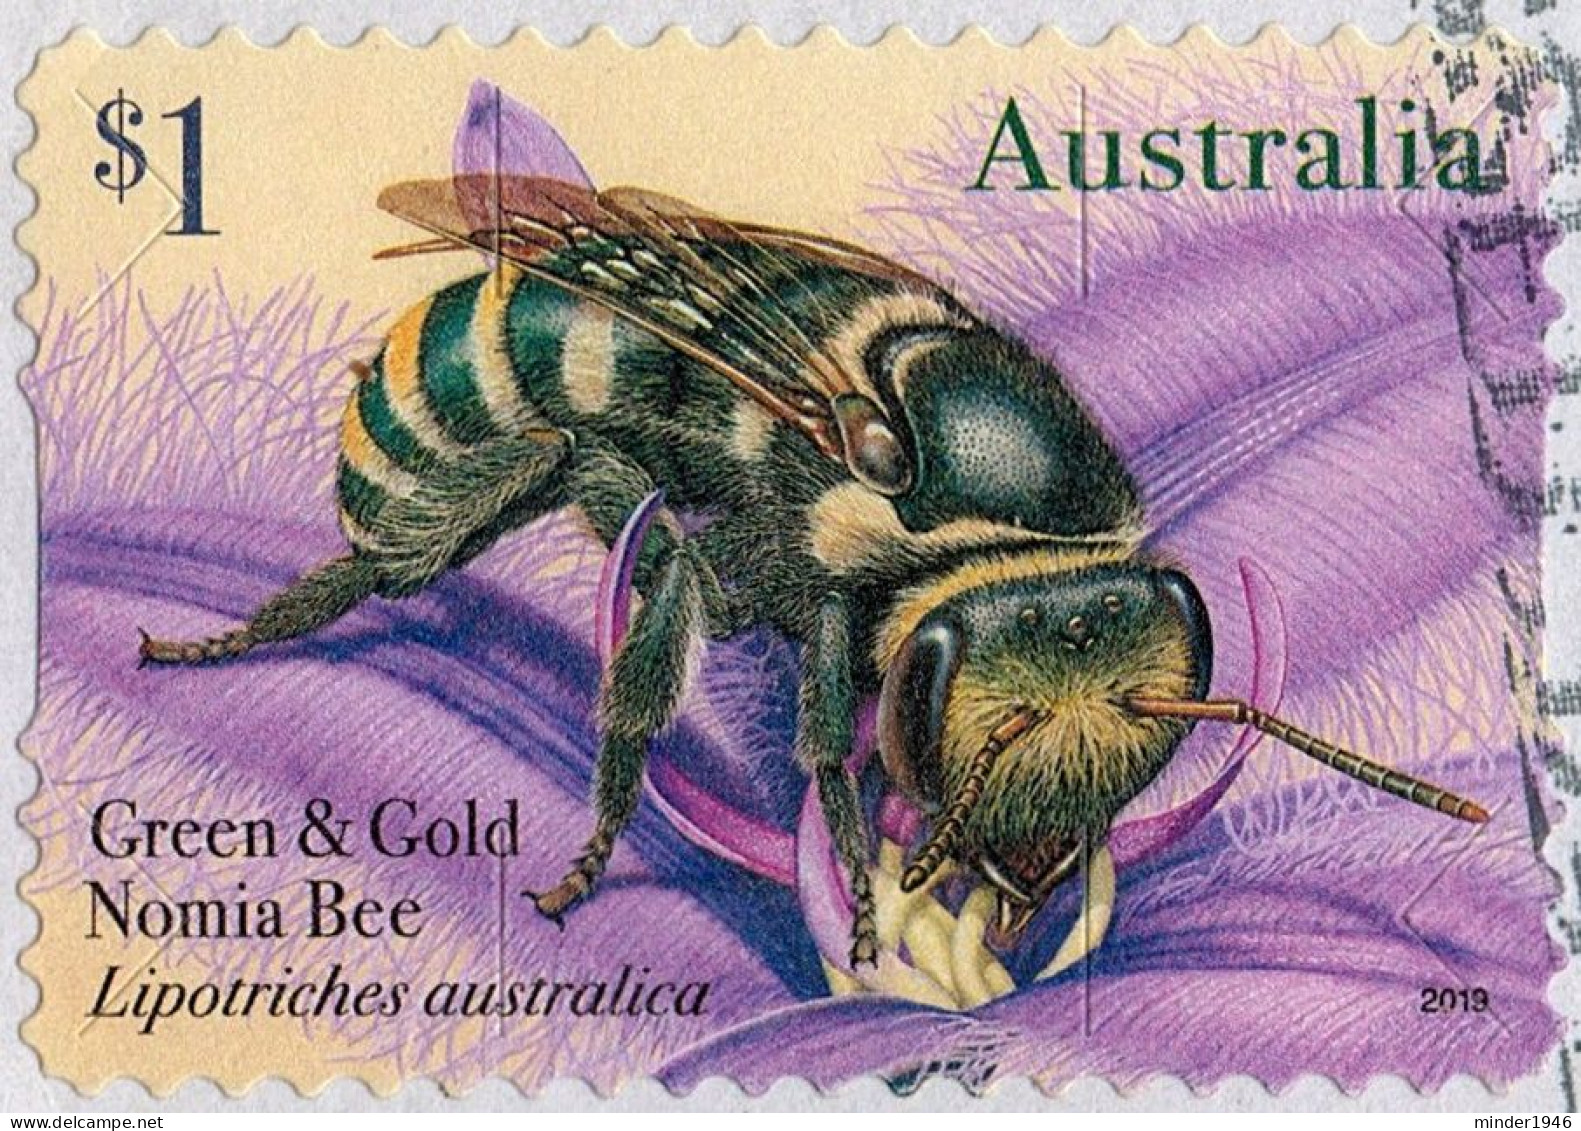 AUSTRALIA 2019 $1 Multicoloured, Native Bees-Green & Gold Nomia Bee Die-Cut Self Adhesive Used - Used Stamps